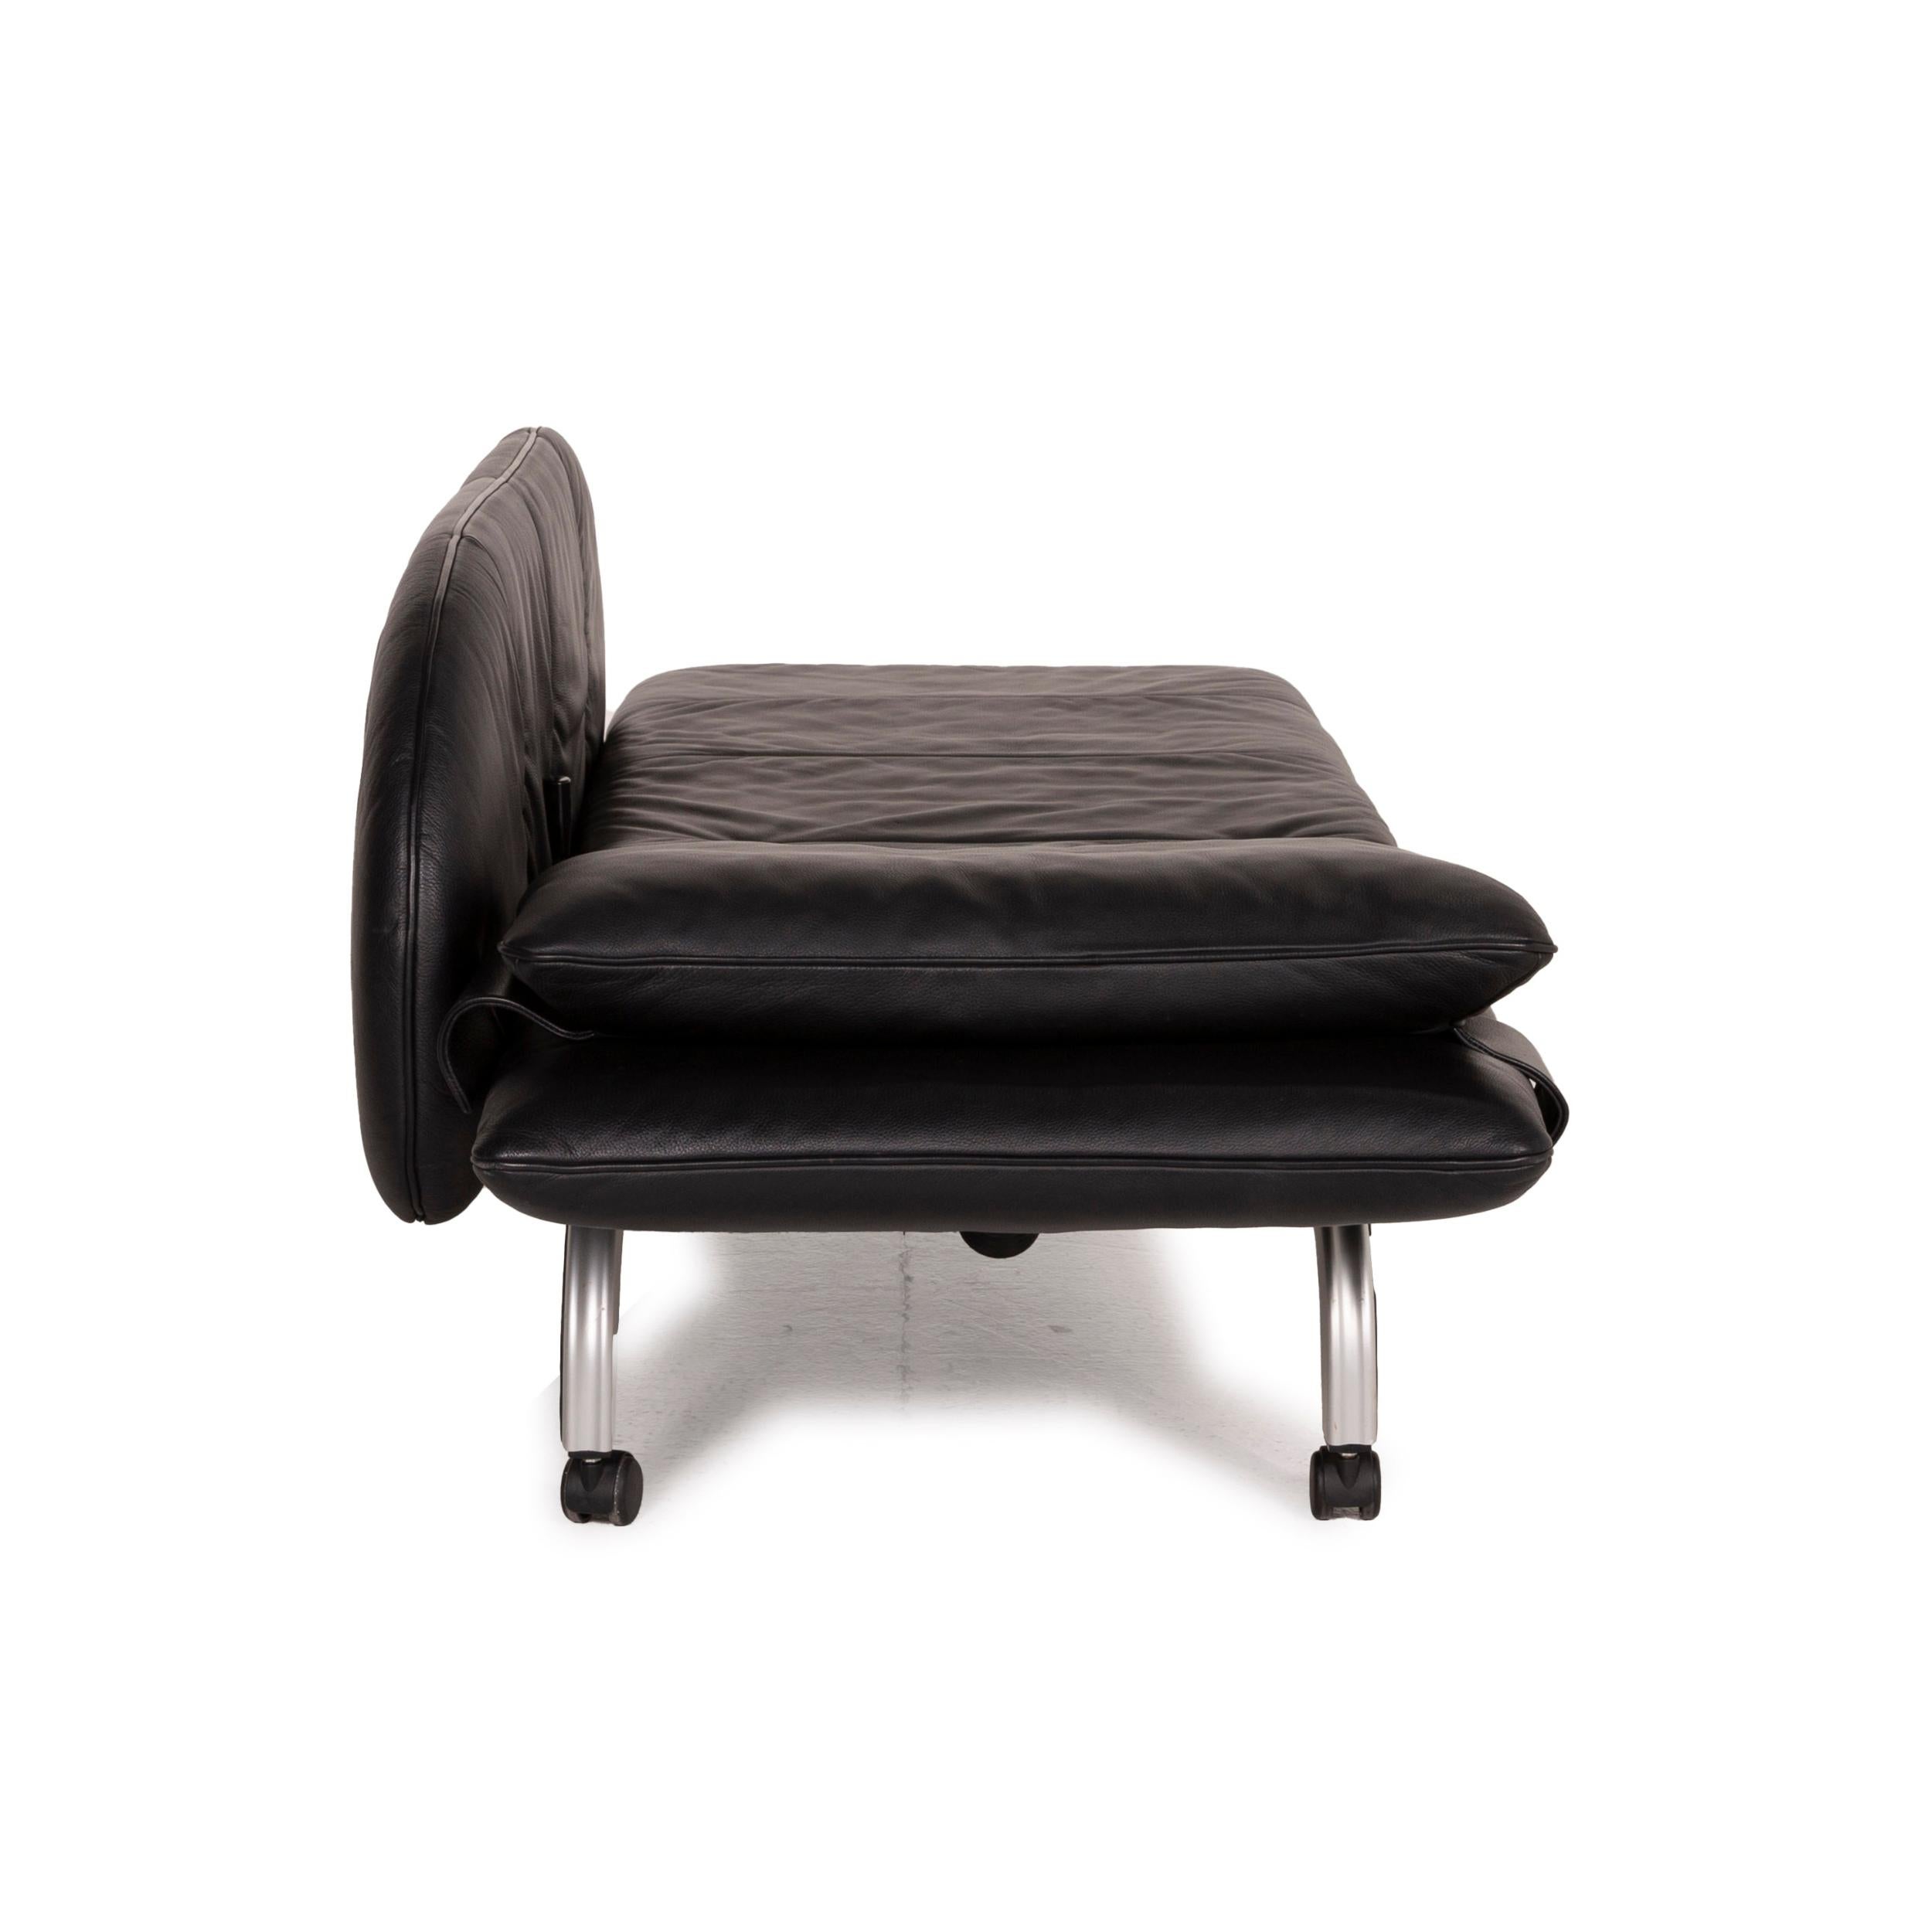 Interprofil Beo Leather Lounger Black Function Two-Seater 3